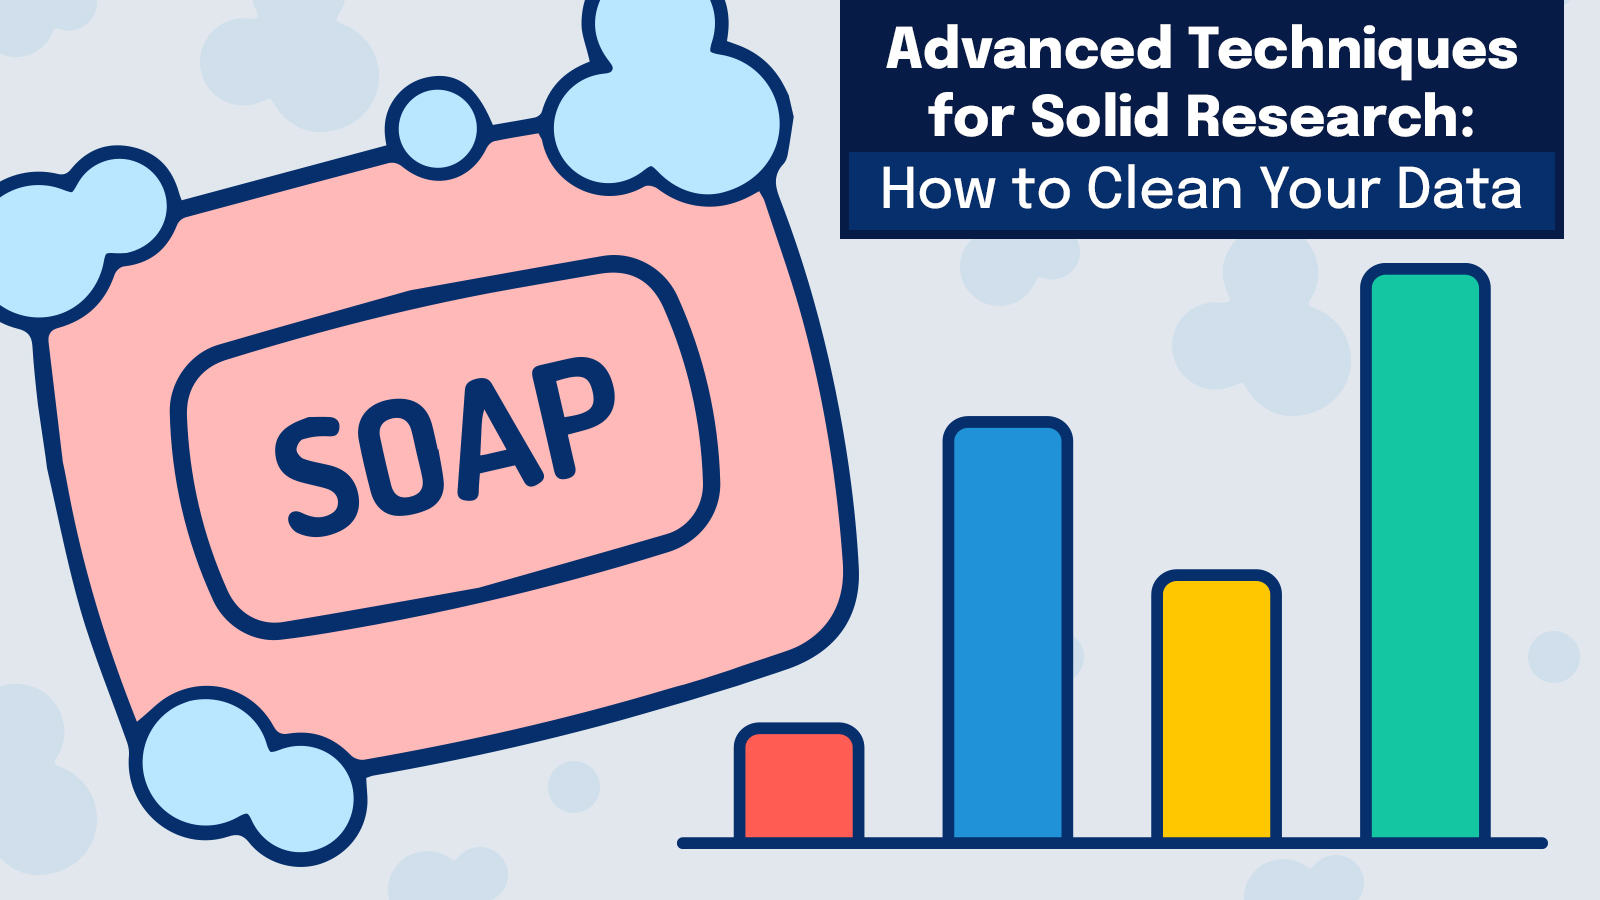 Advanced Techniques for Solid Research: How to Clean Your Data